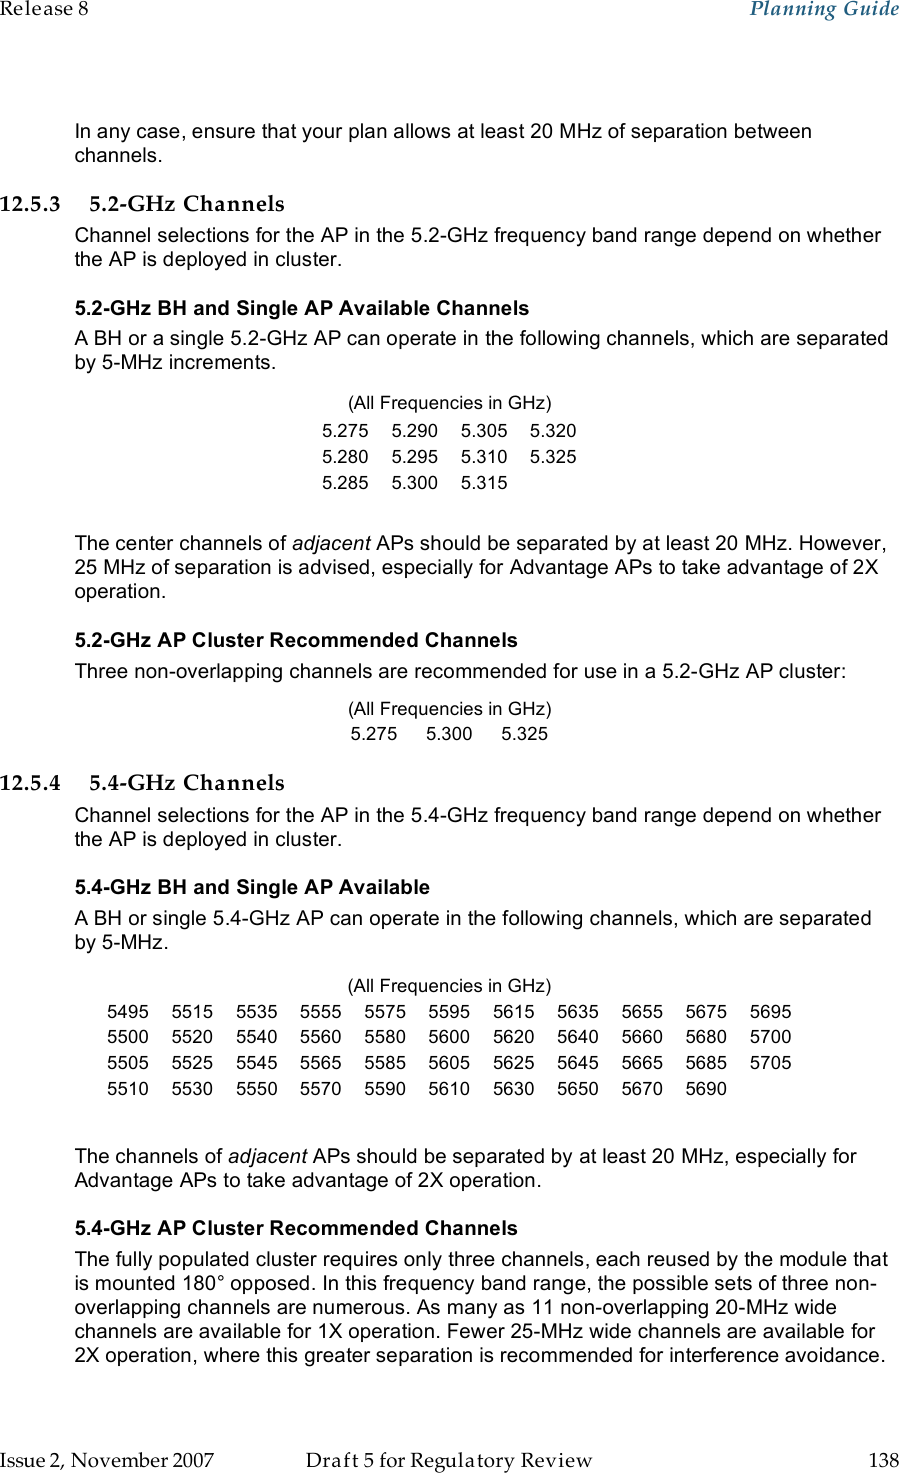 Release 8    Planning Guide                  March 200                  Through Software Release 6.   Issue 2, November 2007  Draft 5 for Regulatory Review  138      In any case, ensure that your plan allows at least 20 MHz of separation between channels. 12.5.3 5.2-GHz Channels Channel selections for the AP in the 5.2-GHz frequency band range depend on whether the AP is deployed in cluster.  5.2-GHz BH and Single AP Available Channels A BH or a single 5.2-GHz AP can operate in the following channels, which are separated by 5-MHz increments. (All Frequencies in GHz) 5.275 5.290 5.305 5.320 5.280 5.295 5.310 5.325 5.285 5.300 5.315   The center channels of adjacent APs should be separated by at least 20 MHz. However,  25 MHz of separation is advised, especially for Advantage APs to take advantage of 2X operation. 5.2-GHz AP Cluster Recommended Channels Three non-overlapping channels are recommended for use in a 5.2-GHz AP cluster: (All Frequencies in GHz) 5.275 5.300 5.325 12.5.4 5.4-GHz Channels Channel selections for the AP in the 5.4-GHz frequency band range depend on whether the AP is deployed in cluster.  5.4-GHz BH and Single AP Available  A BH or single 5.4-GHz AP can operate in the following channels, which are separated by 5-MHz. (All Frequencies in GHz) 5495 5515 5535 5555 5575 5595 5615 5635 5655 5675 5695 5500 5520 5540 5560 5580 5600 5620 5640 5660 5680 5700 5505 5525 5545 5565 5585 5605 5625 5645 5665 5685 5705 5510 5530 5550 5570 5590 5610 5630 5650 5670 5690   The channels of adjacent APs should be separated by at least 20 MHz, especially for Advantage APs to take advantage of 2X operation. 5.4-GHz AP Cluster Recommended Channels The fully populated cluster requires only three channels, each reused by the module that is mounted 180° opposed. In this frequency band range, the possible sets of three non-overlapping channels are numerous. As many as 11 non-overlapping 20-MHz wide channels are available for 1X operation. Fewer 25-MHz wide channels are available for 2X operation, where this greater separation is recommended for interference avoidance. 